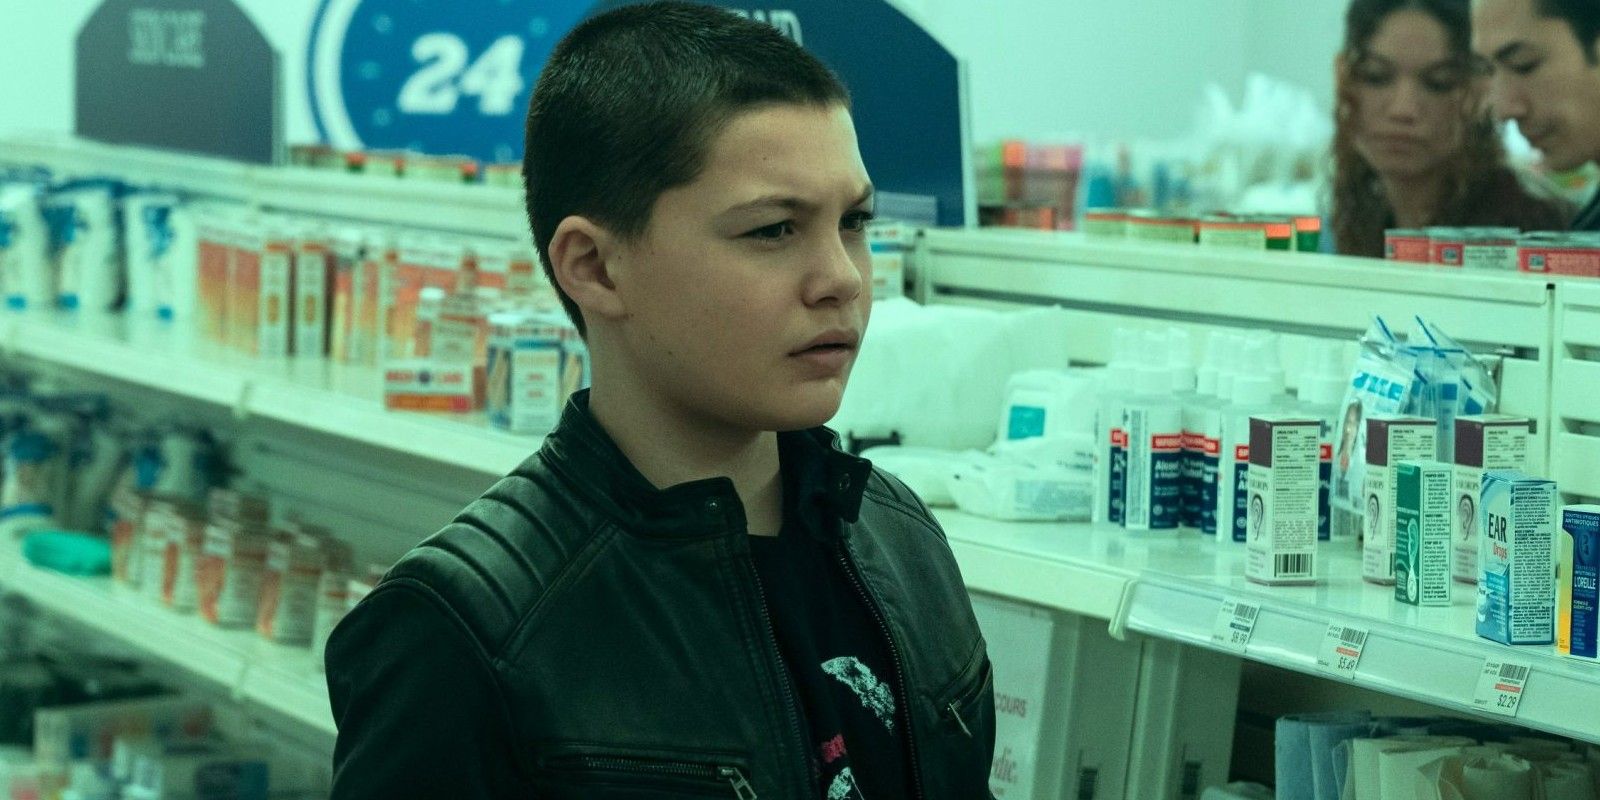 Stanley standing in a pharmacy in Umbrella Academy season 3